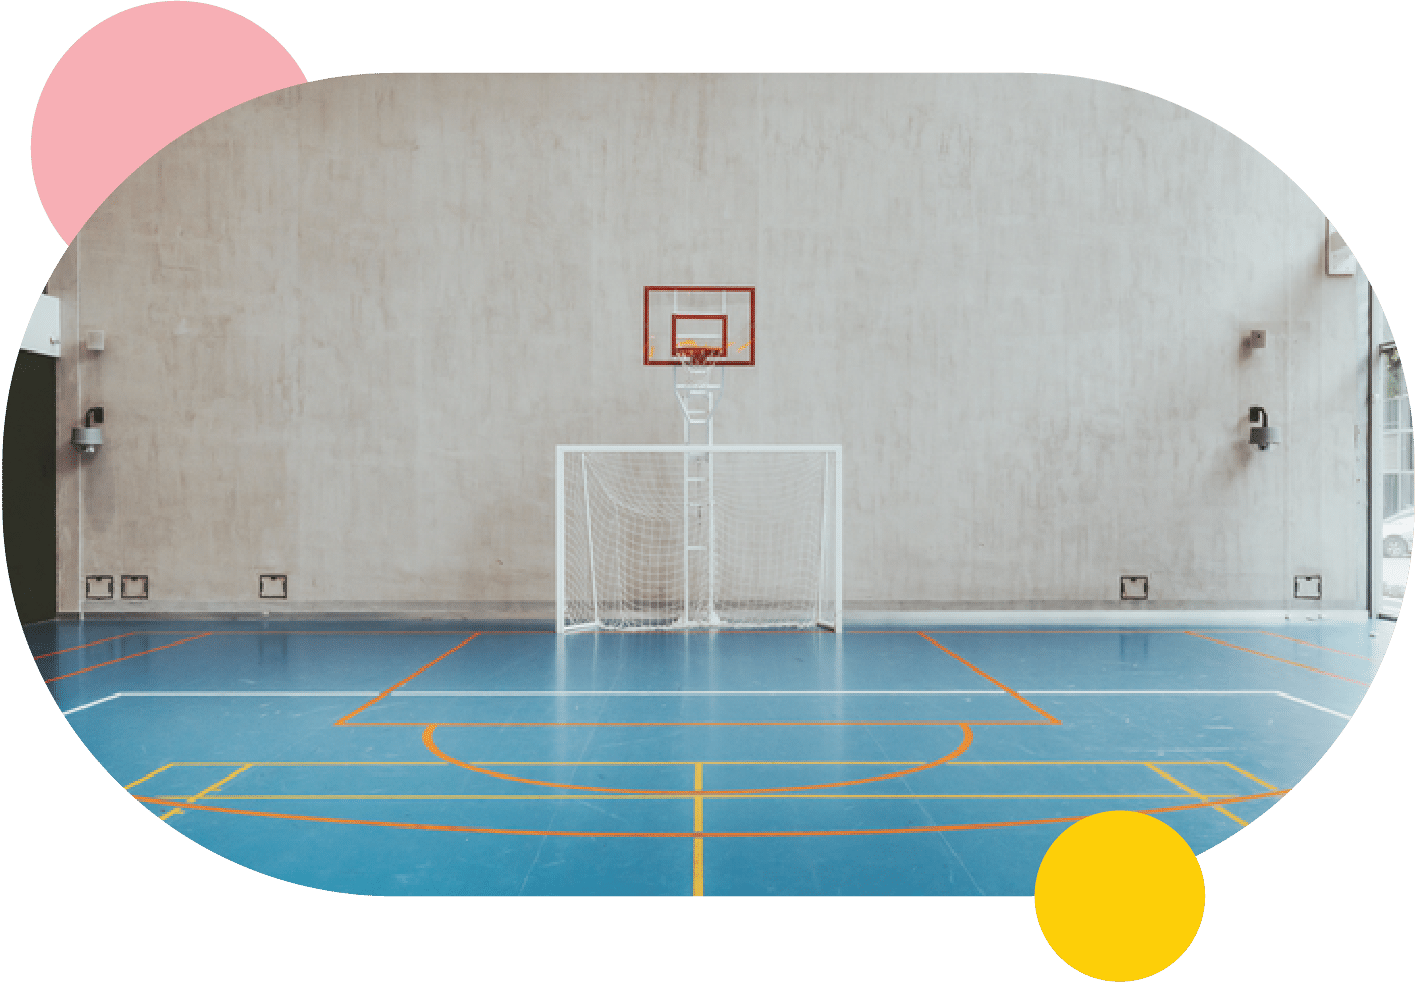 An empty basketball court available for facility rentals, complete with a basketball hoop.